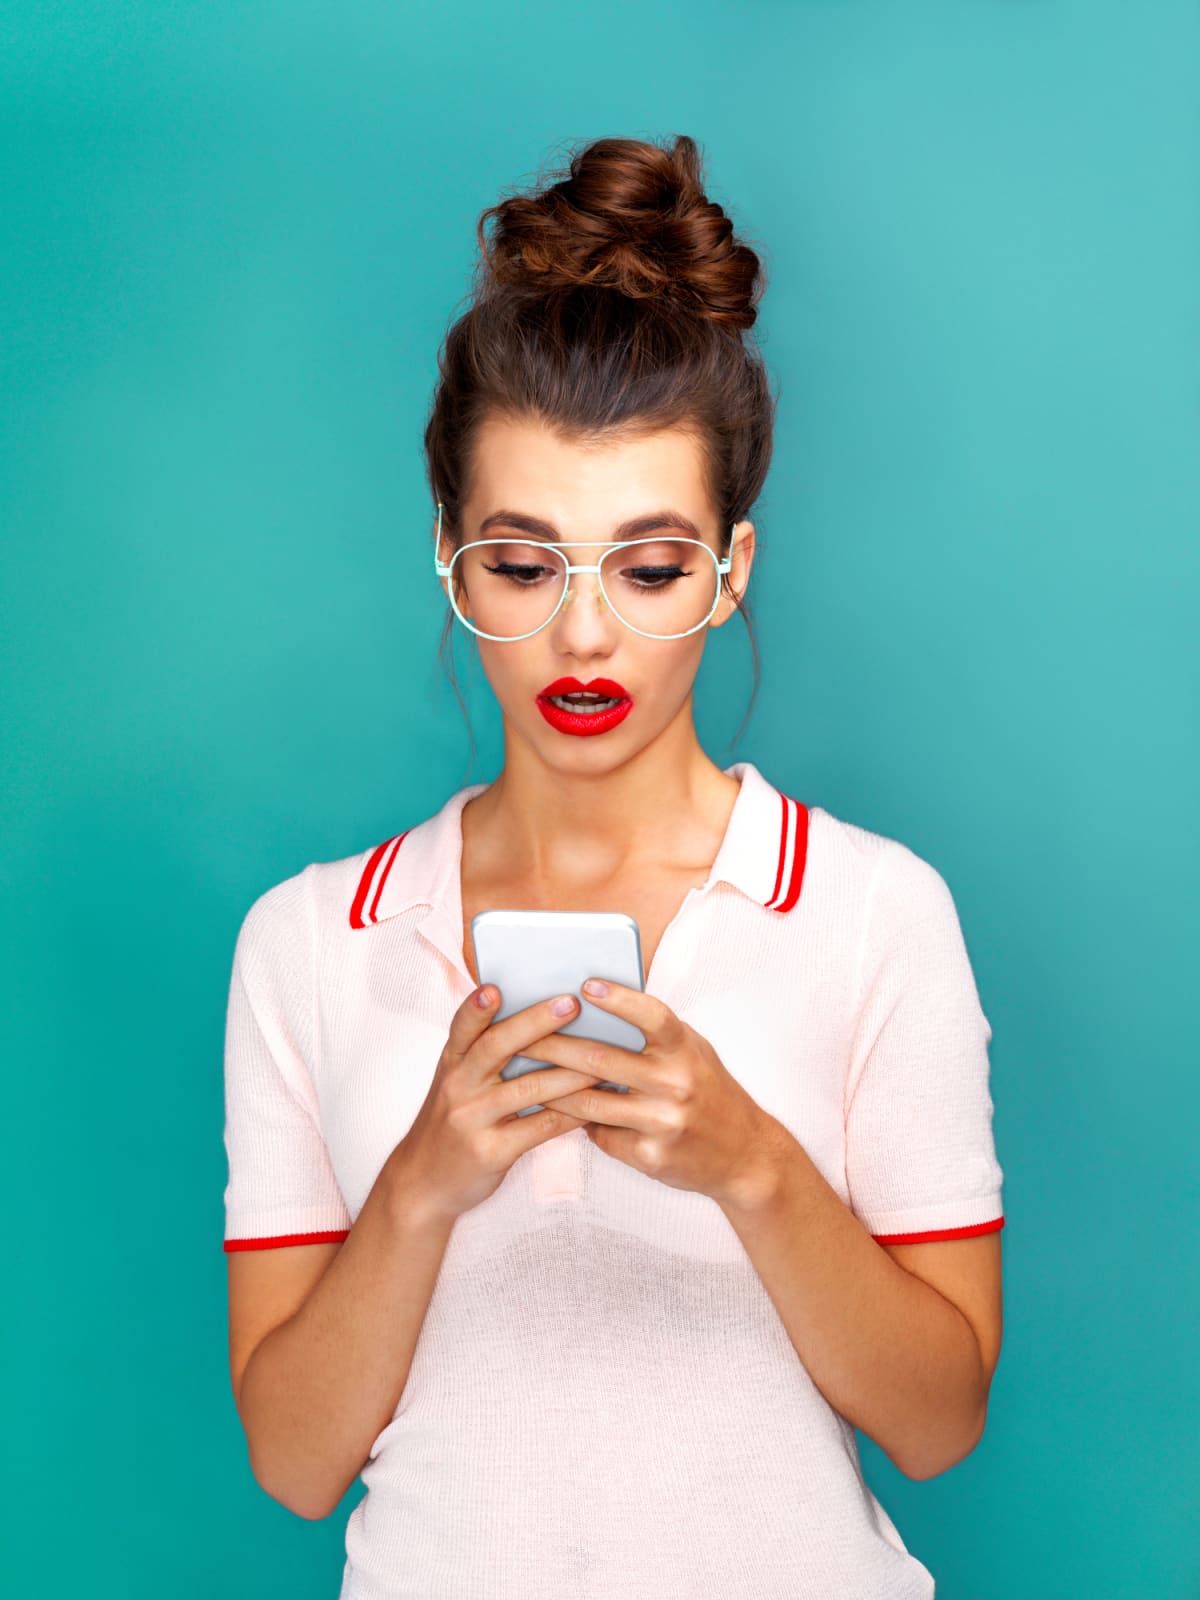 Young woman looks down at her smartphone with a shocked expression